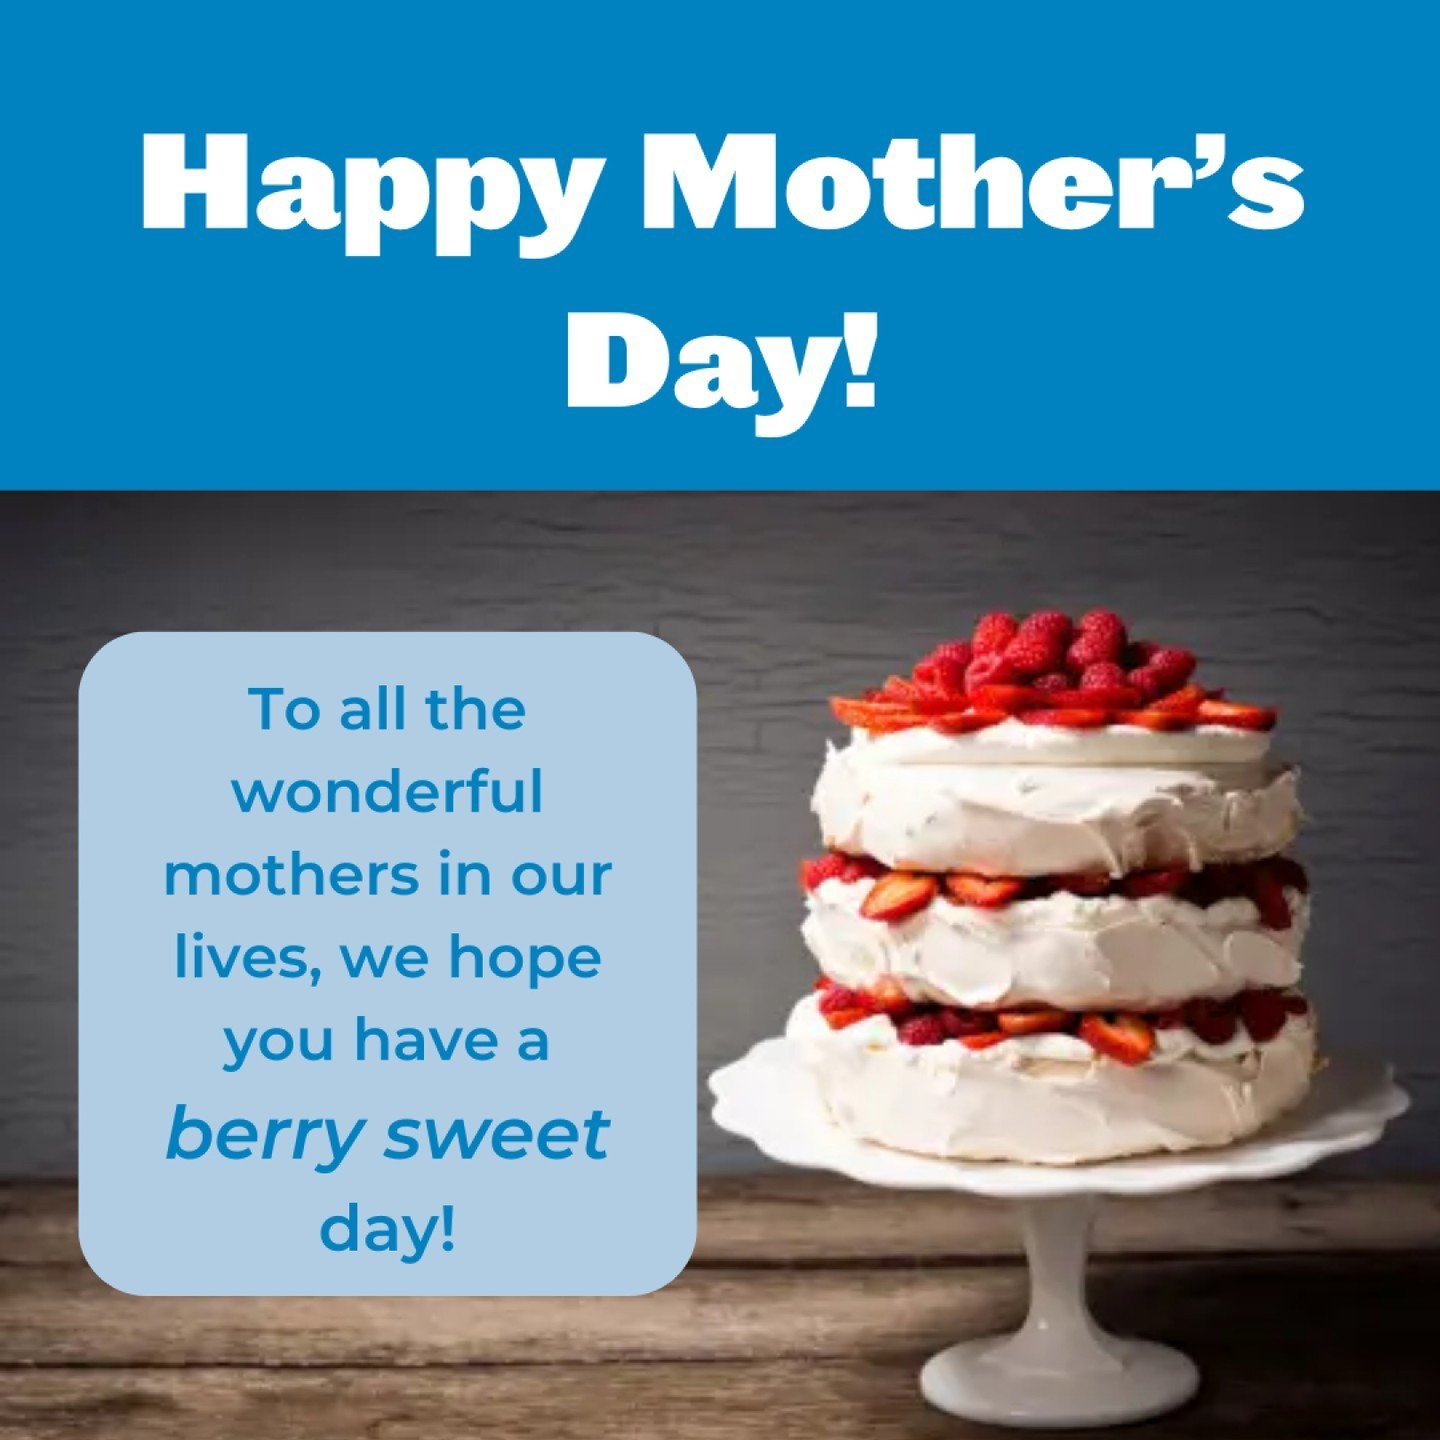 Happy Mother's Day to all the wonderful mums out there!

#mothersday #loveyoumum #spoilmum #moi #moiaustralia #shortmax #margarine#pastrymargarine #bakeryingredients #bakerymargarines #bakerymanufacturers #foodwholesalers #foodservices #foodservicein